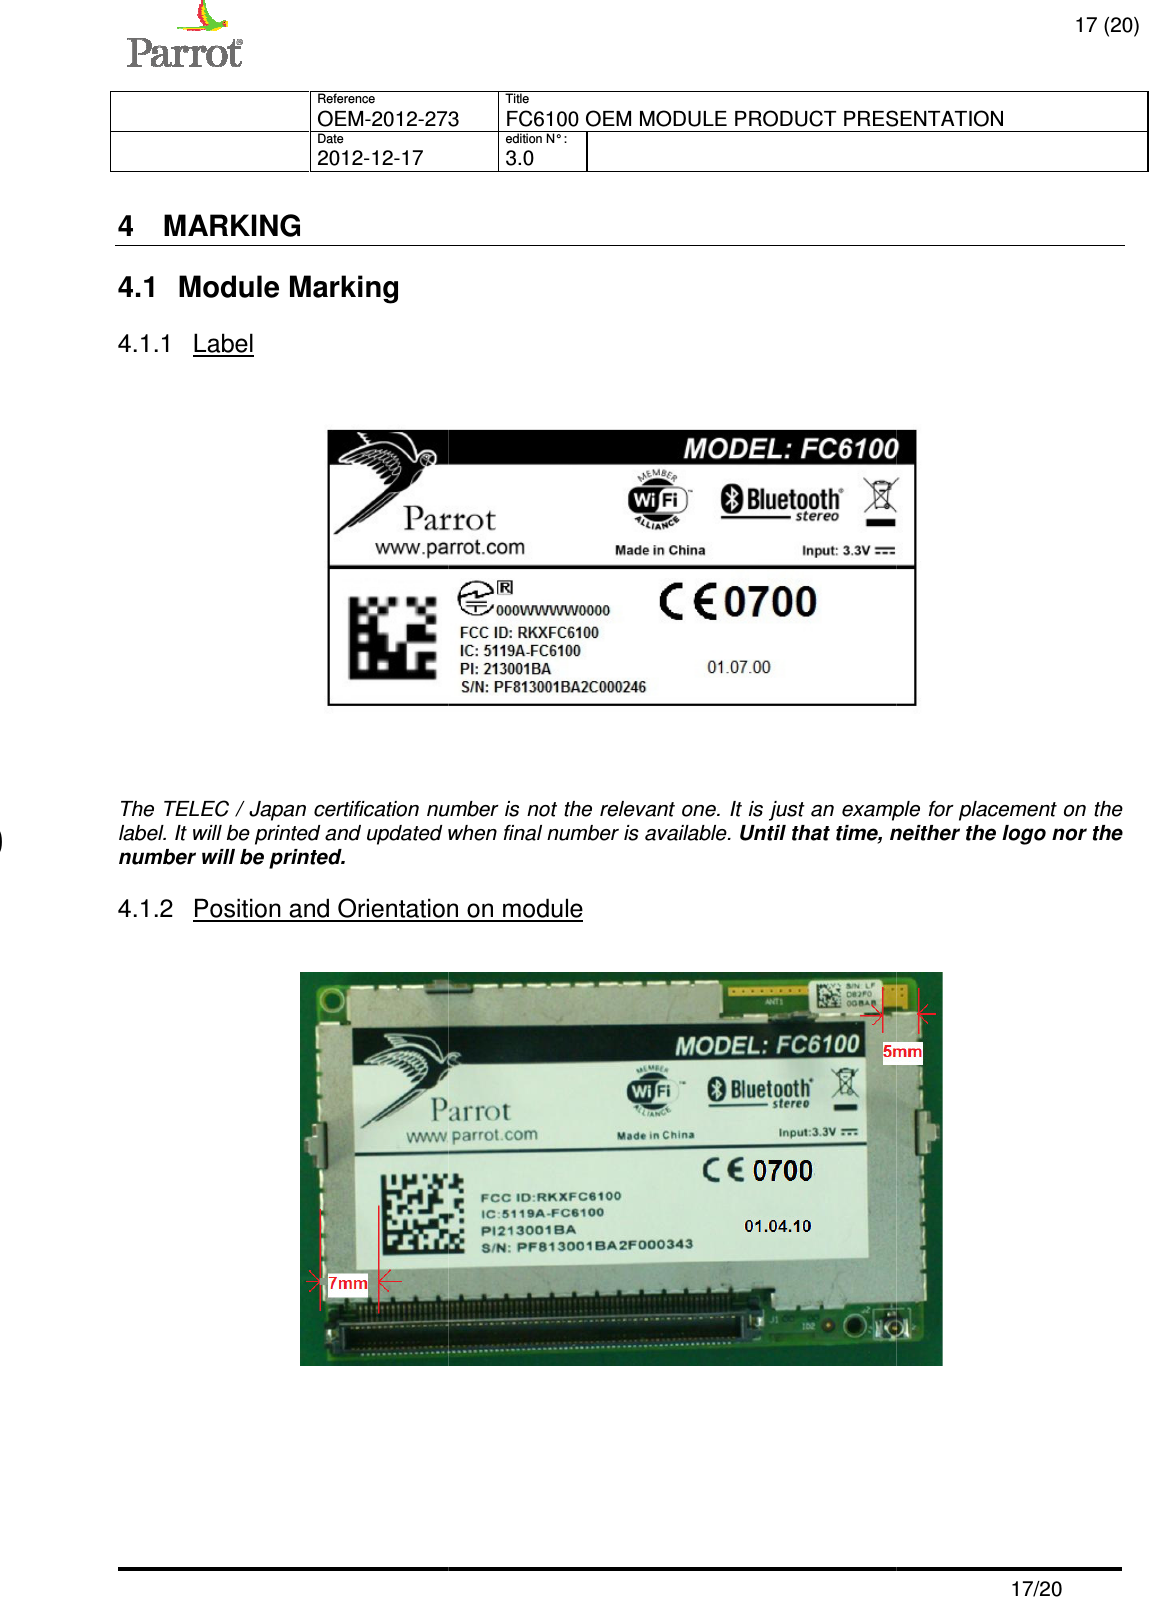     Reference   OEM-2012-273  Date   2012-12-17   4  MARKING  4.1  Module Marking 4.1.1  Label  The TELEC / Japan certification number is not the relevant one. It is just an example for placement on the label. It will be printed and updated when final number is available. number will be printed. 4.1.2 Position and Orientation on m   0700   Title 273 FC6100 OEM MODULE PRODUCT PRESENTATIONedition N° :   3.0   certification number is not the relevant one. It is just an example for placement on the updated when final number is available. Until that time, neither the logo nor the Position and Orientation on module  17 (20) FC6100 OEM MODULE PRODUCT PRESENTATION  17/20  certification number is not the relevant one. It is just an example for placement on the , neither the logo nor the  